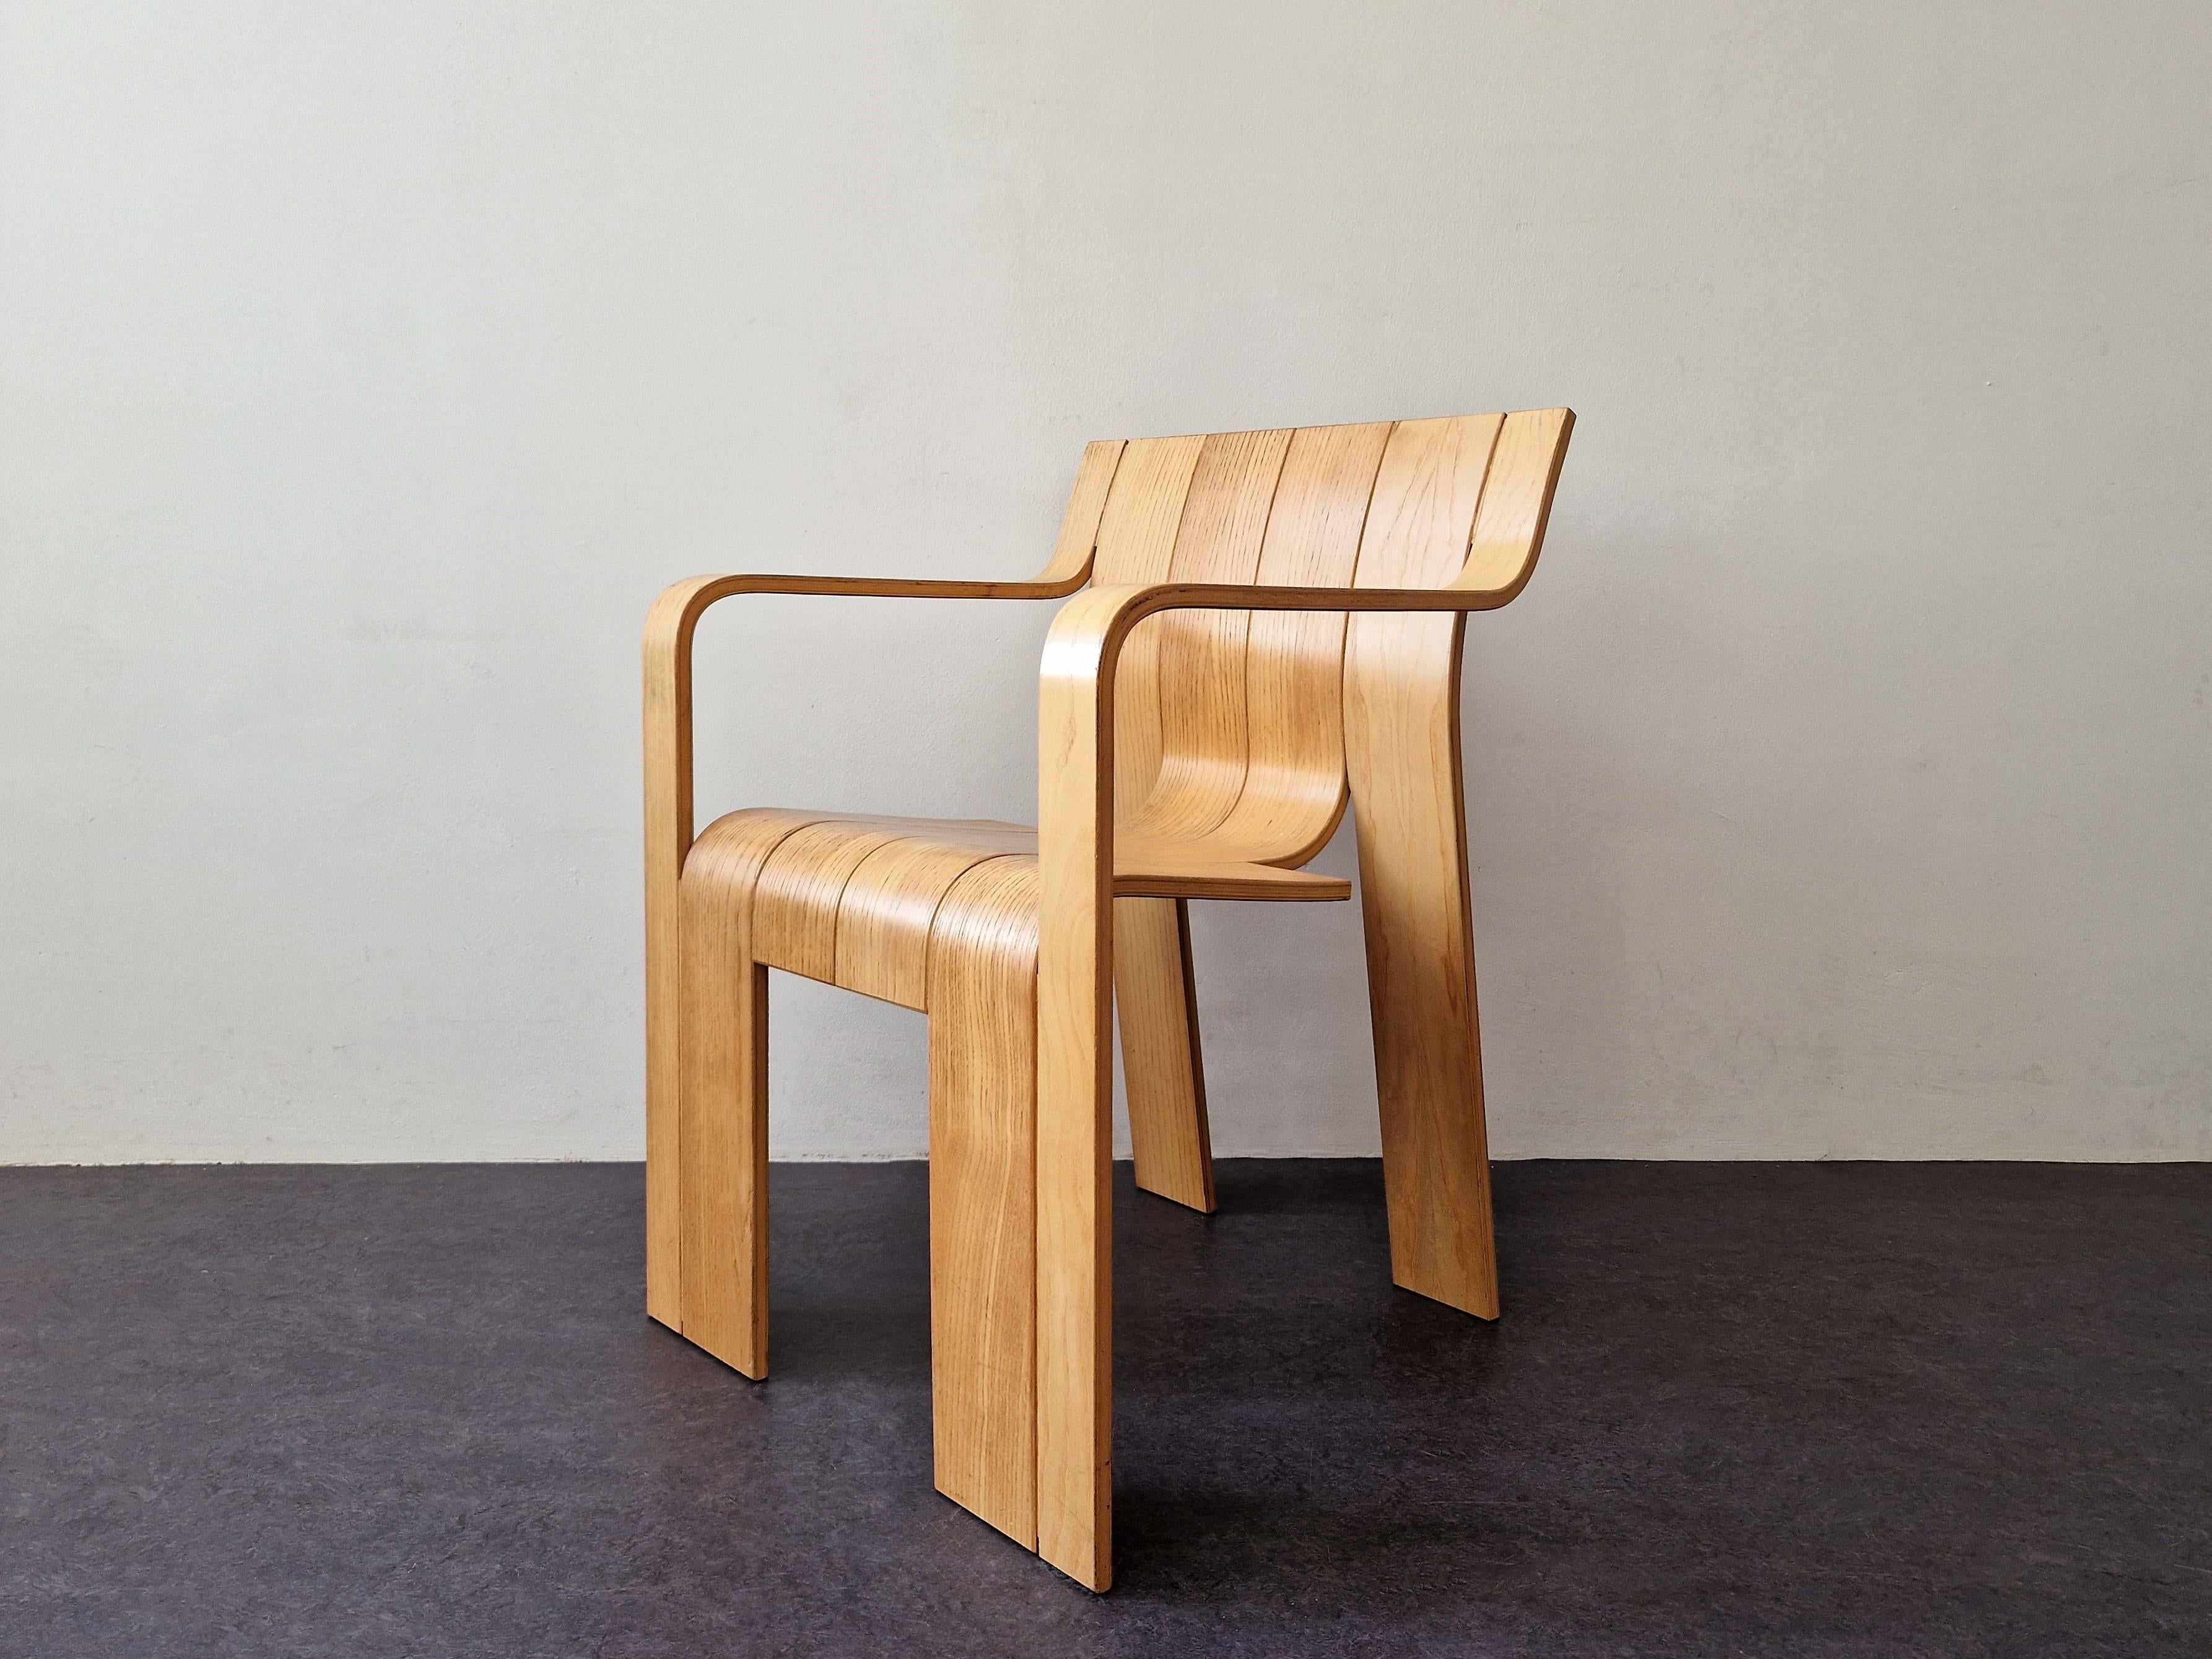 An iconic chair; the 'Strip chair', designed by the famous Dutch designer Gijs Bakker for Castelijn. It was released in 1974. This chair is the more rare version with armrests, only a limited amount have been produced. It is made out of 8 bended